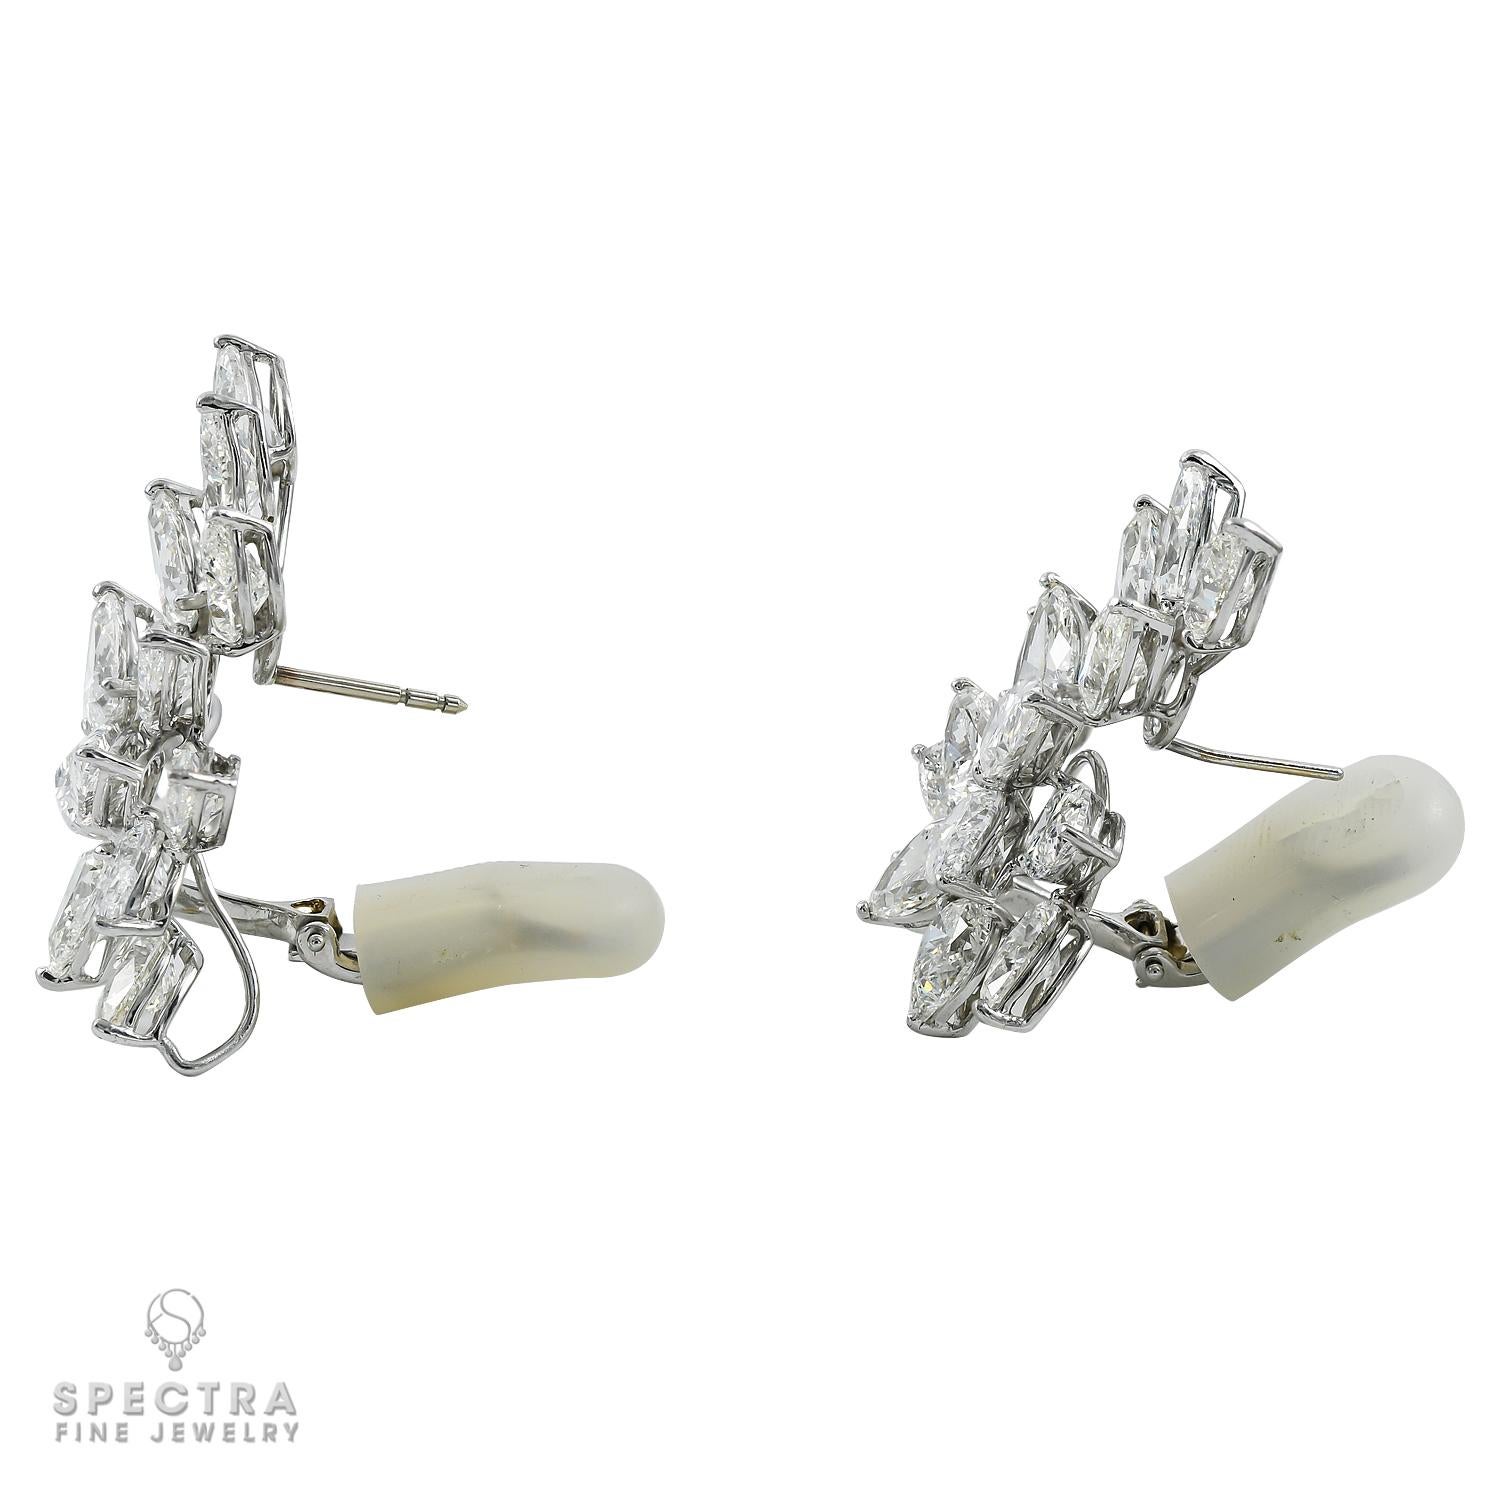 If you are getting ready for gala season, which in New York City, runs from Fall through Spring, you might be searching for a quintessentially elegant pair of diamond earrings to frame your face in radiance. This stunning pair of Spectra Fine